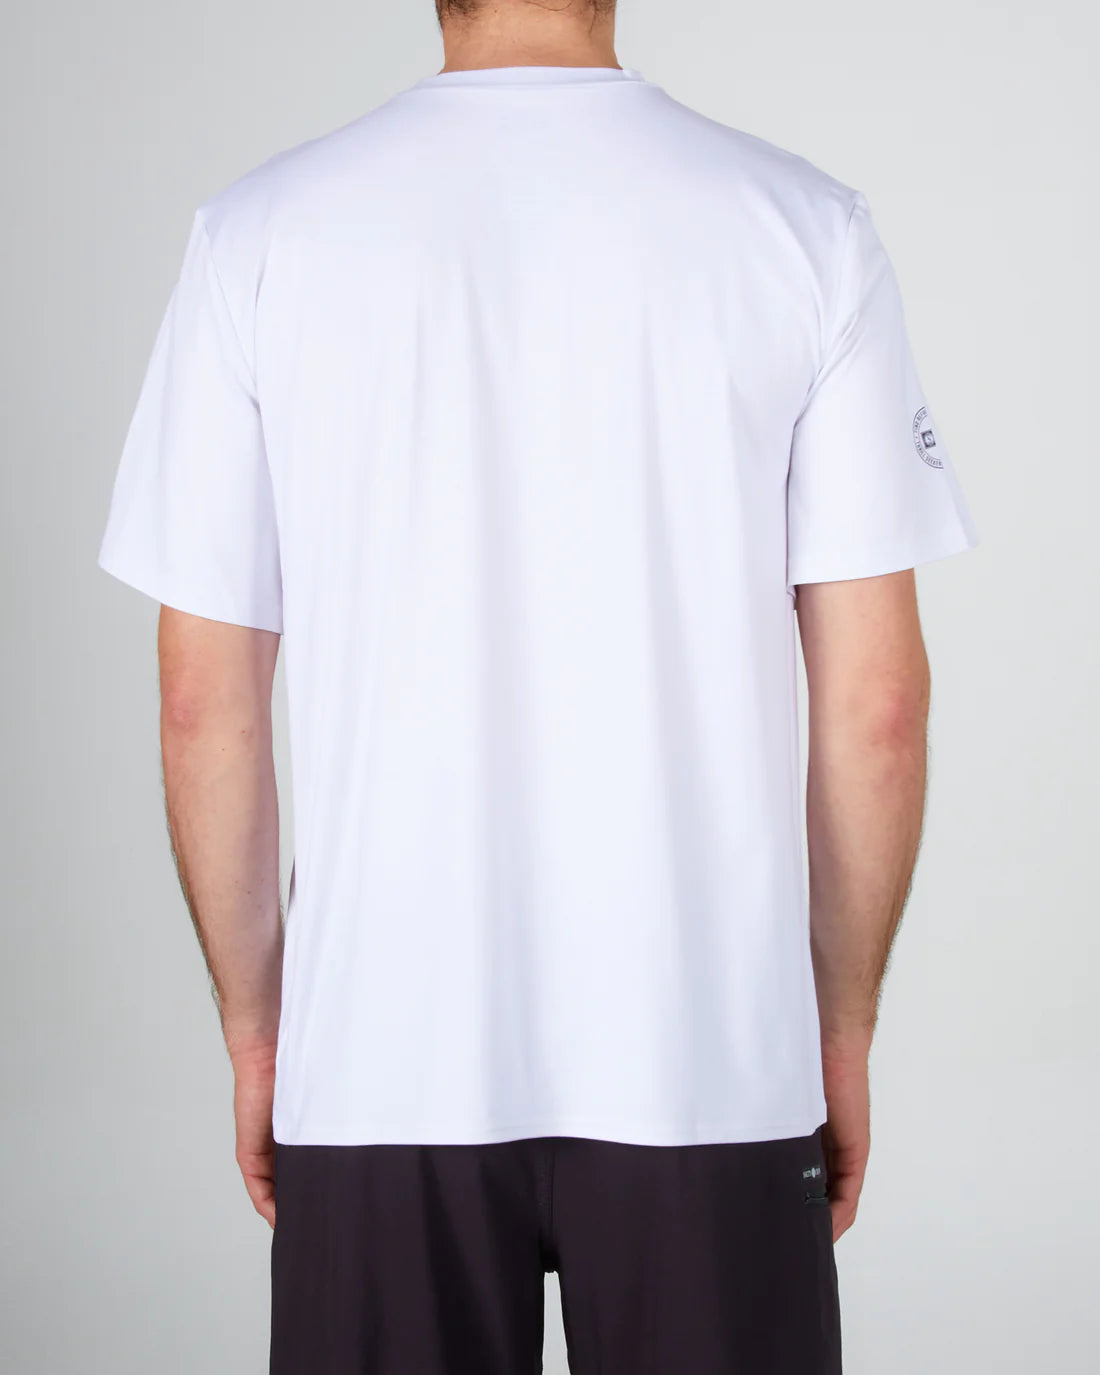 Thrill Seekers S/S Surf Shirt White